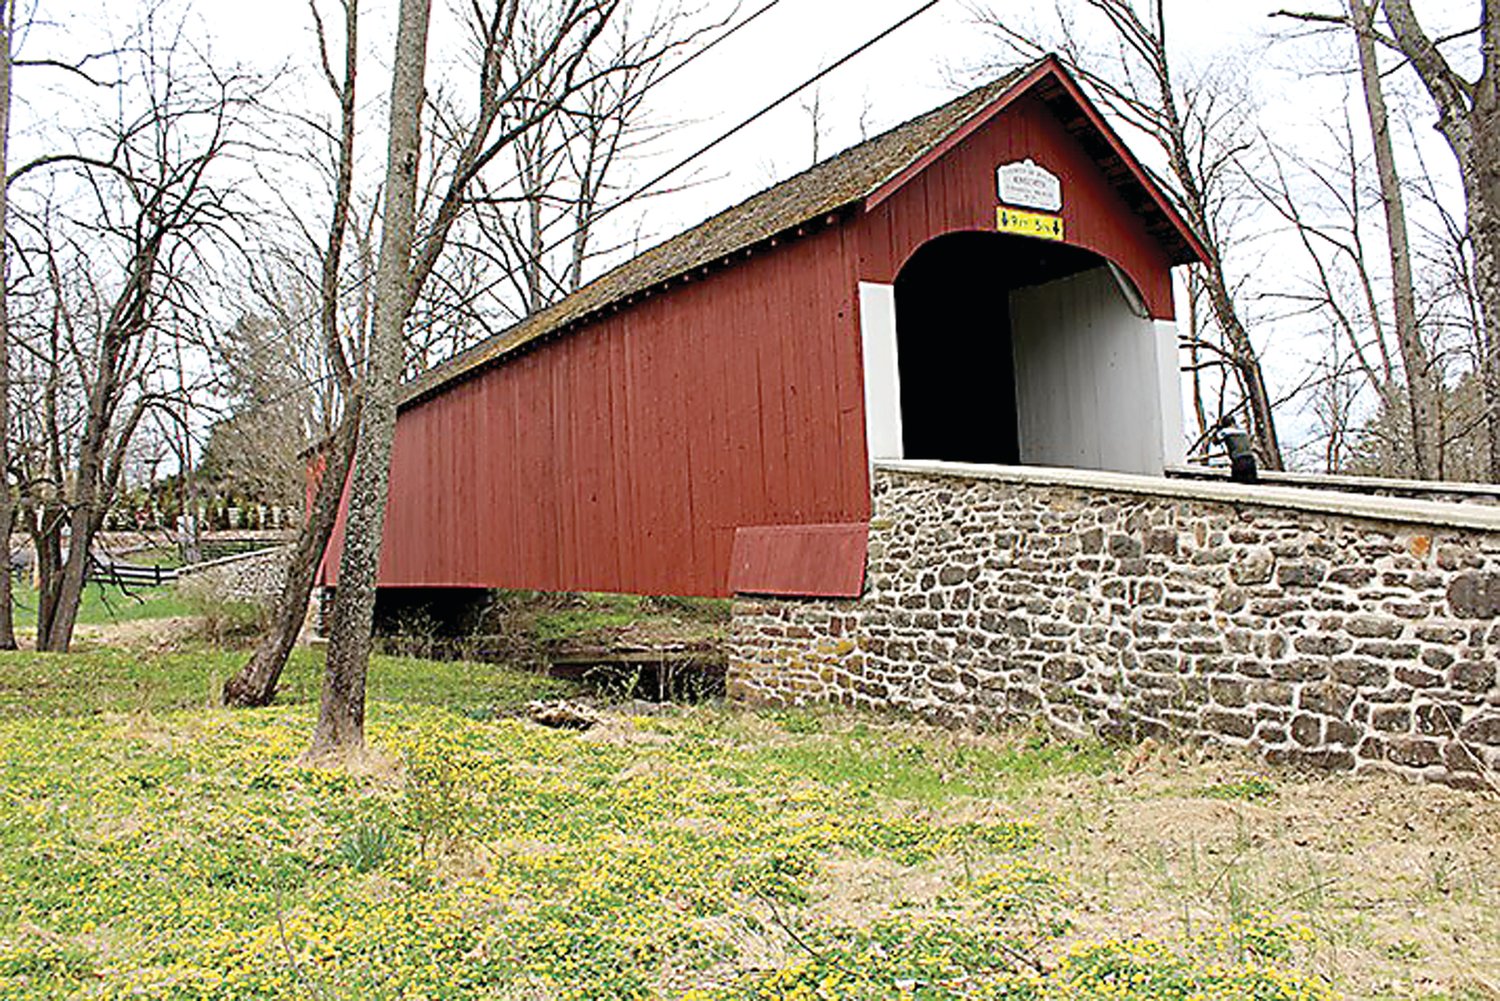 Delaware Valley University students will sharing their new documentary on Bucks County’s covered bridges on Friday, May 3. Photograph courtesy of Doug McCambridge.